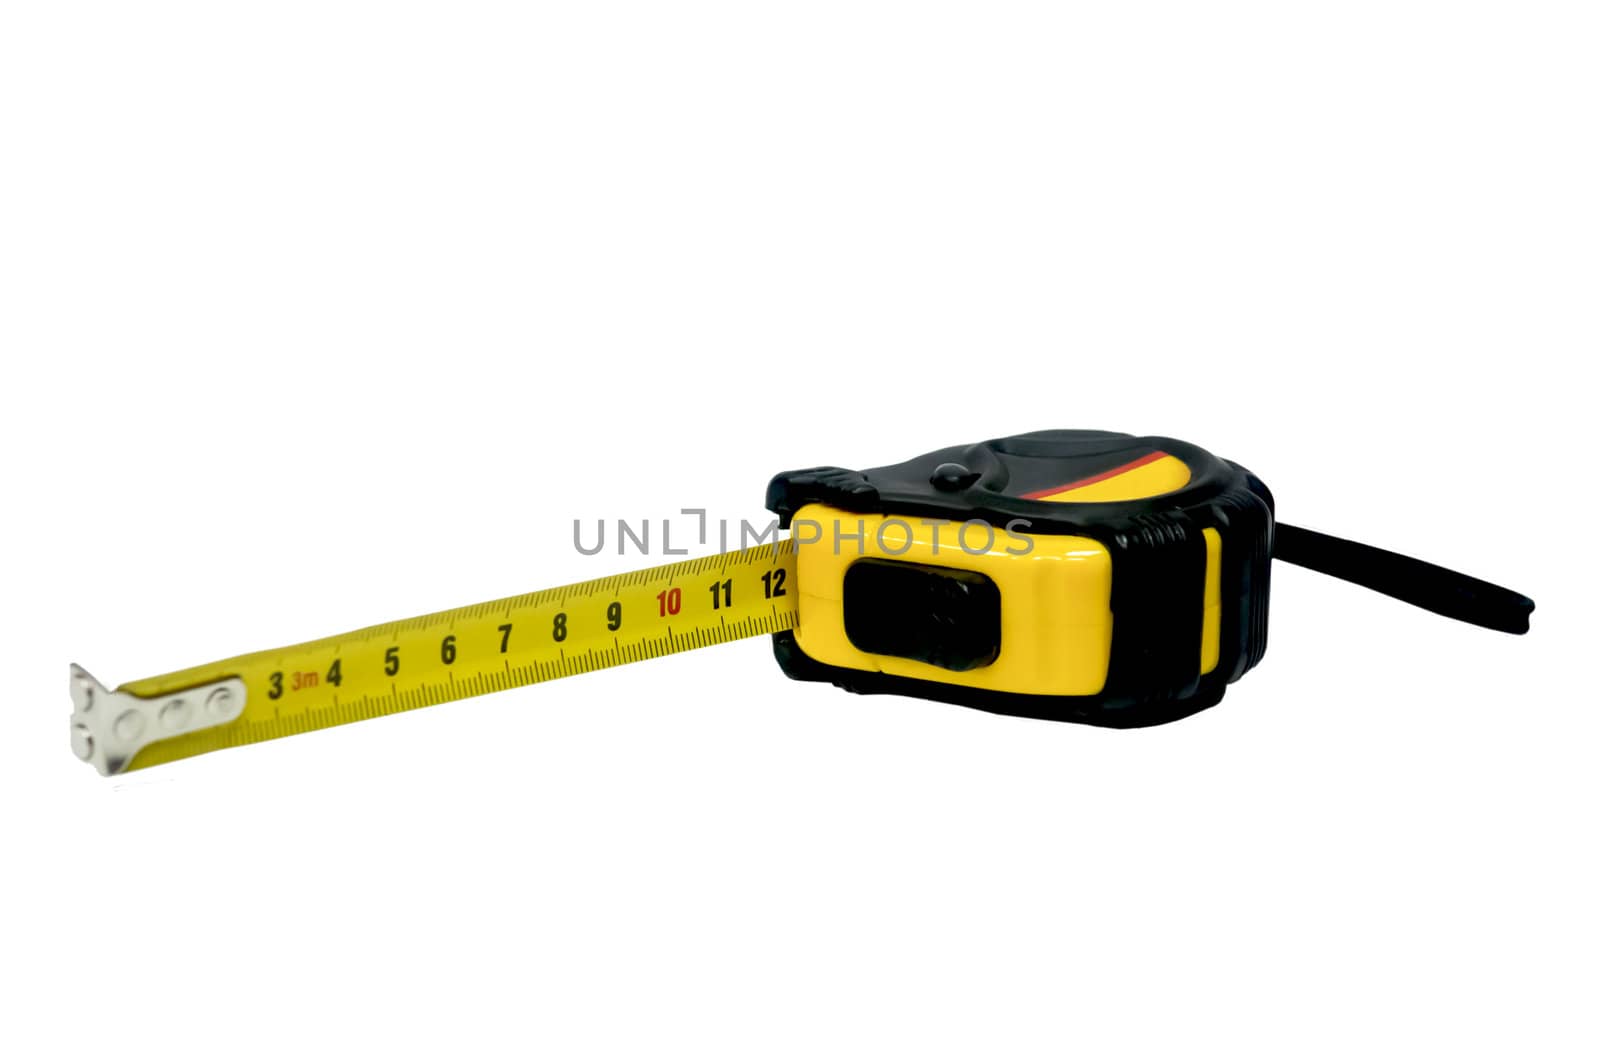 Construction metre isolated on a white background